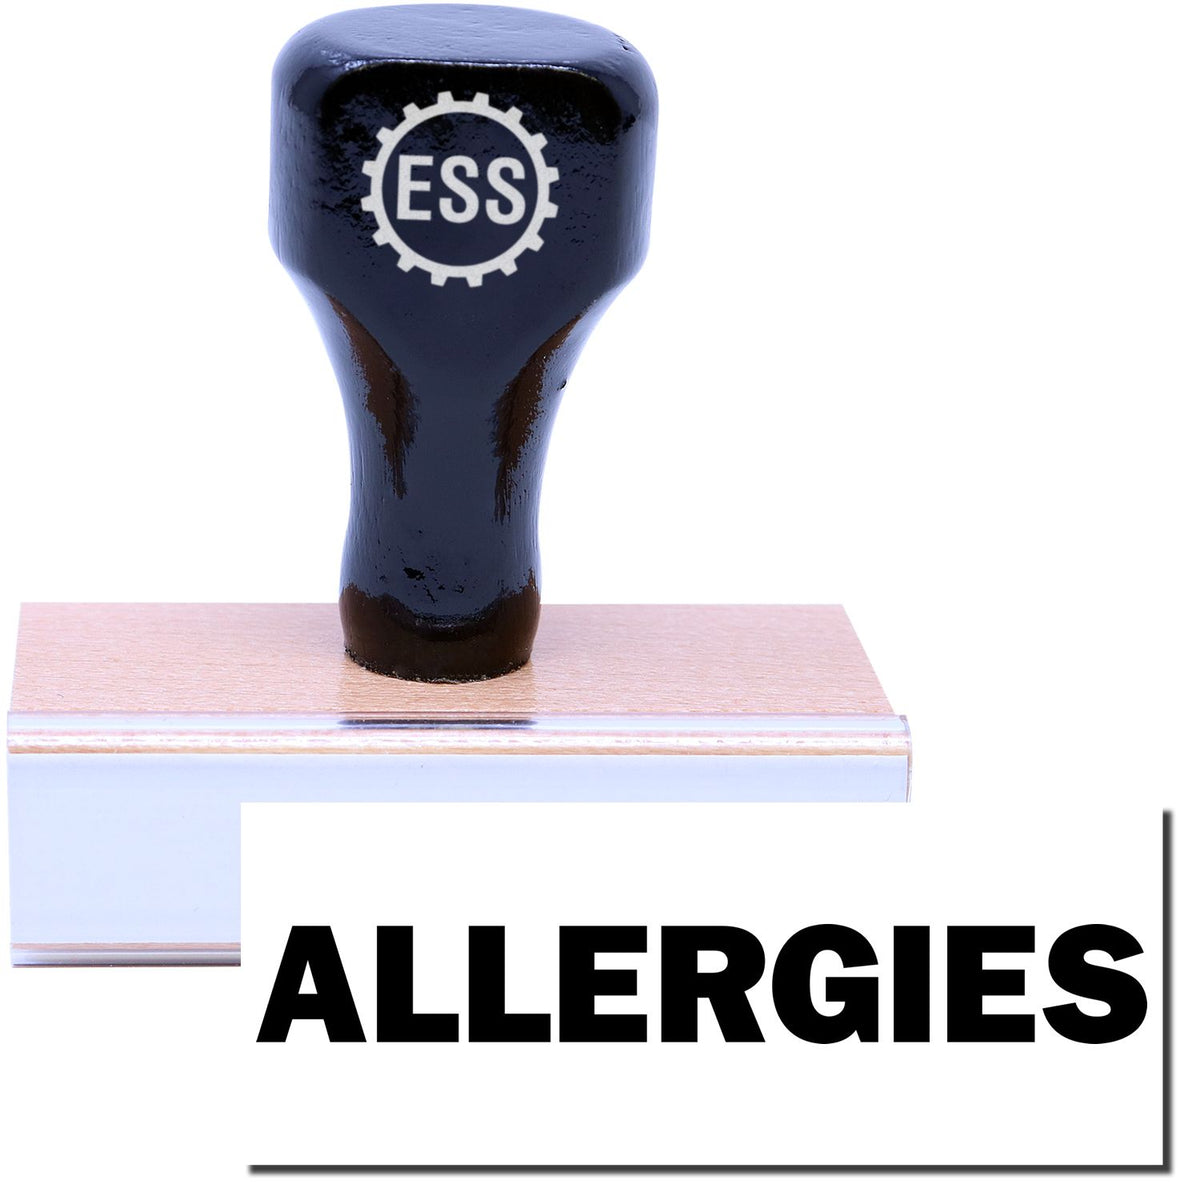 A stock office rubber stamp with a stamped image showing how the text &quot;ALLERGIES&quot; is displayed after stamping.